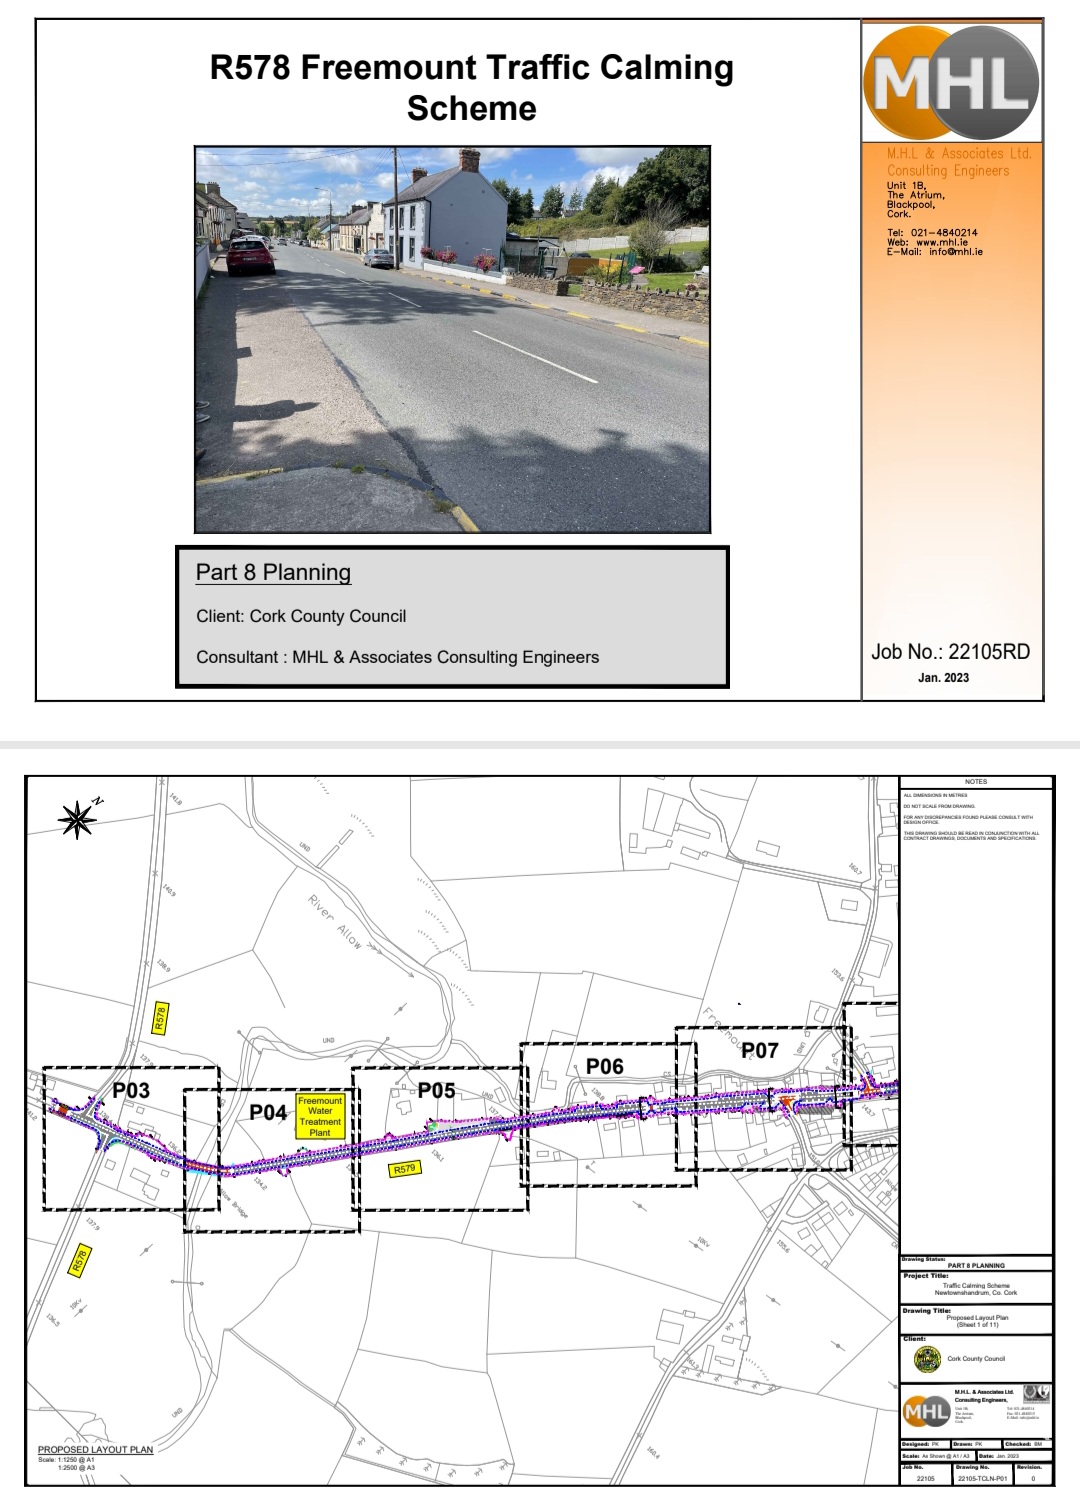 Proposals for Traffic Calming In Freemount Village Published